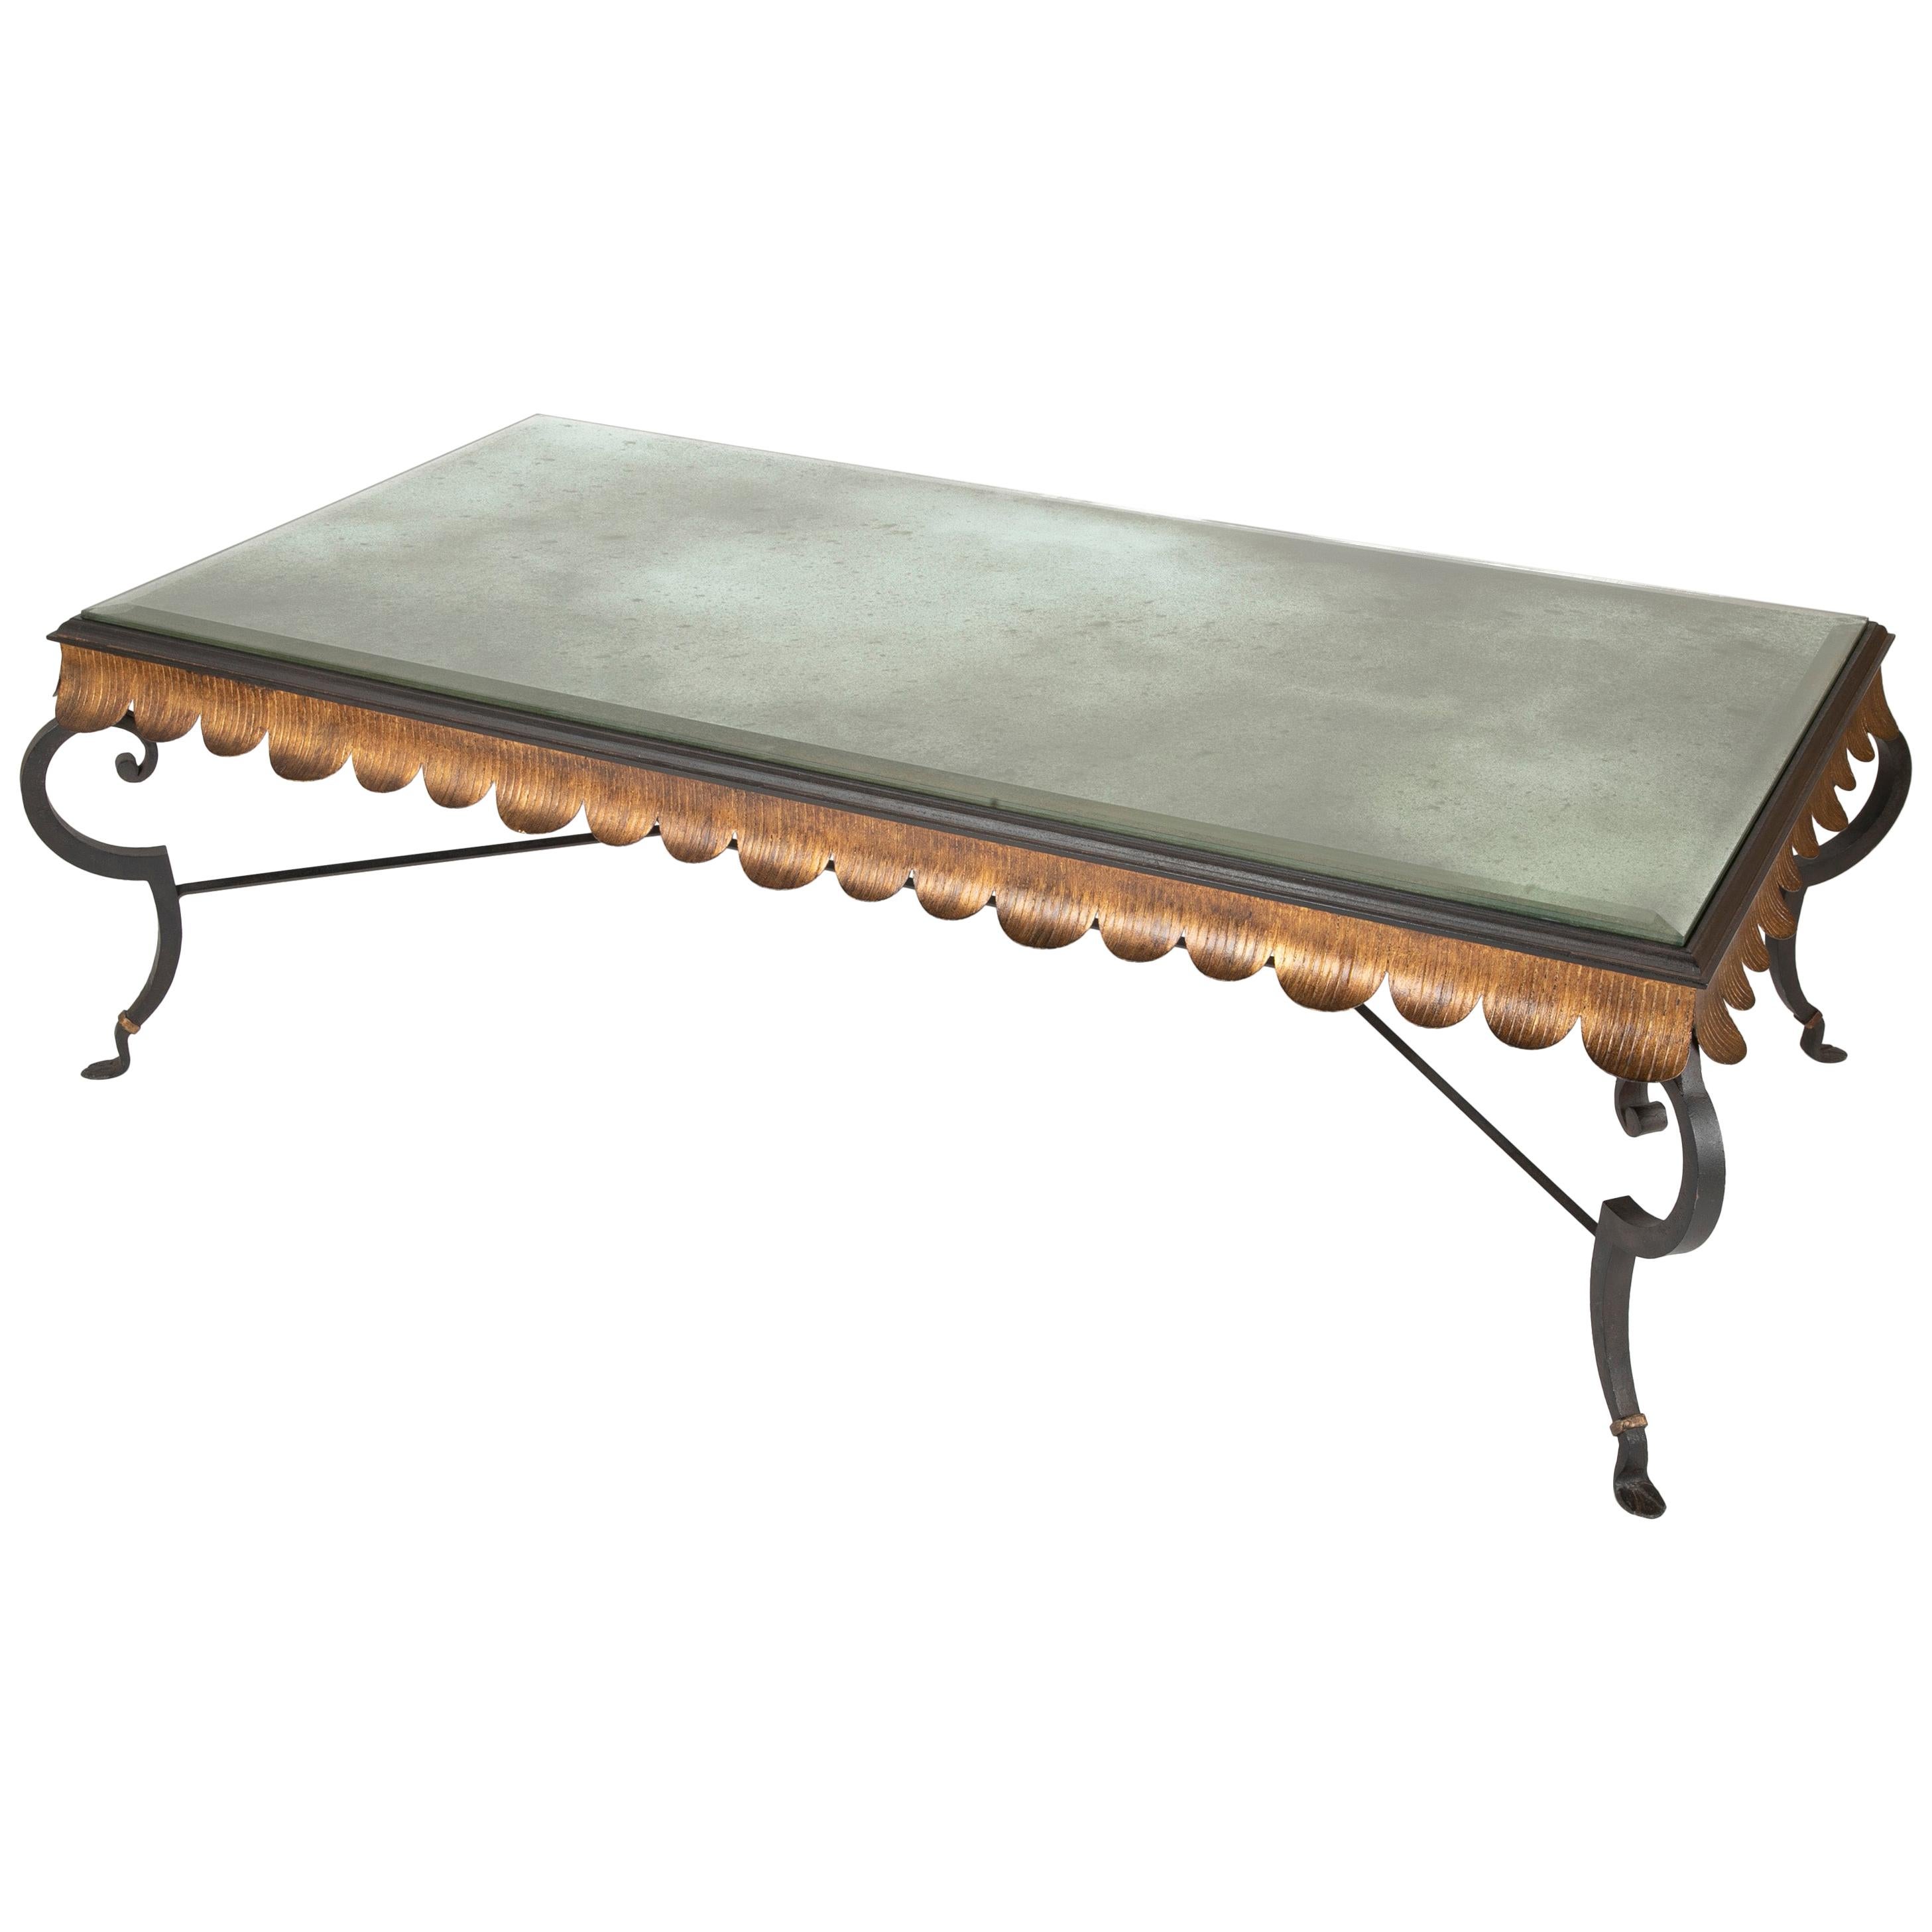 Gilt iron coffee table with custom antiqued and beveled glass top by Minton Spidell.